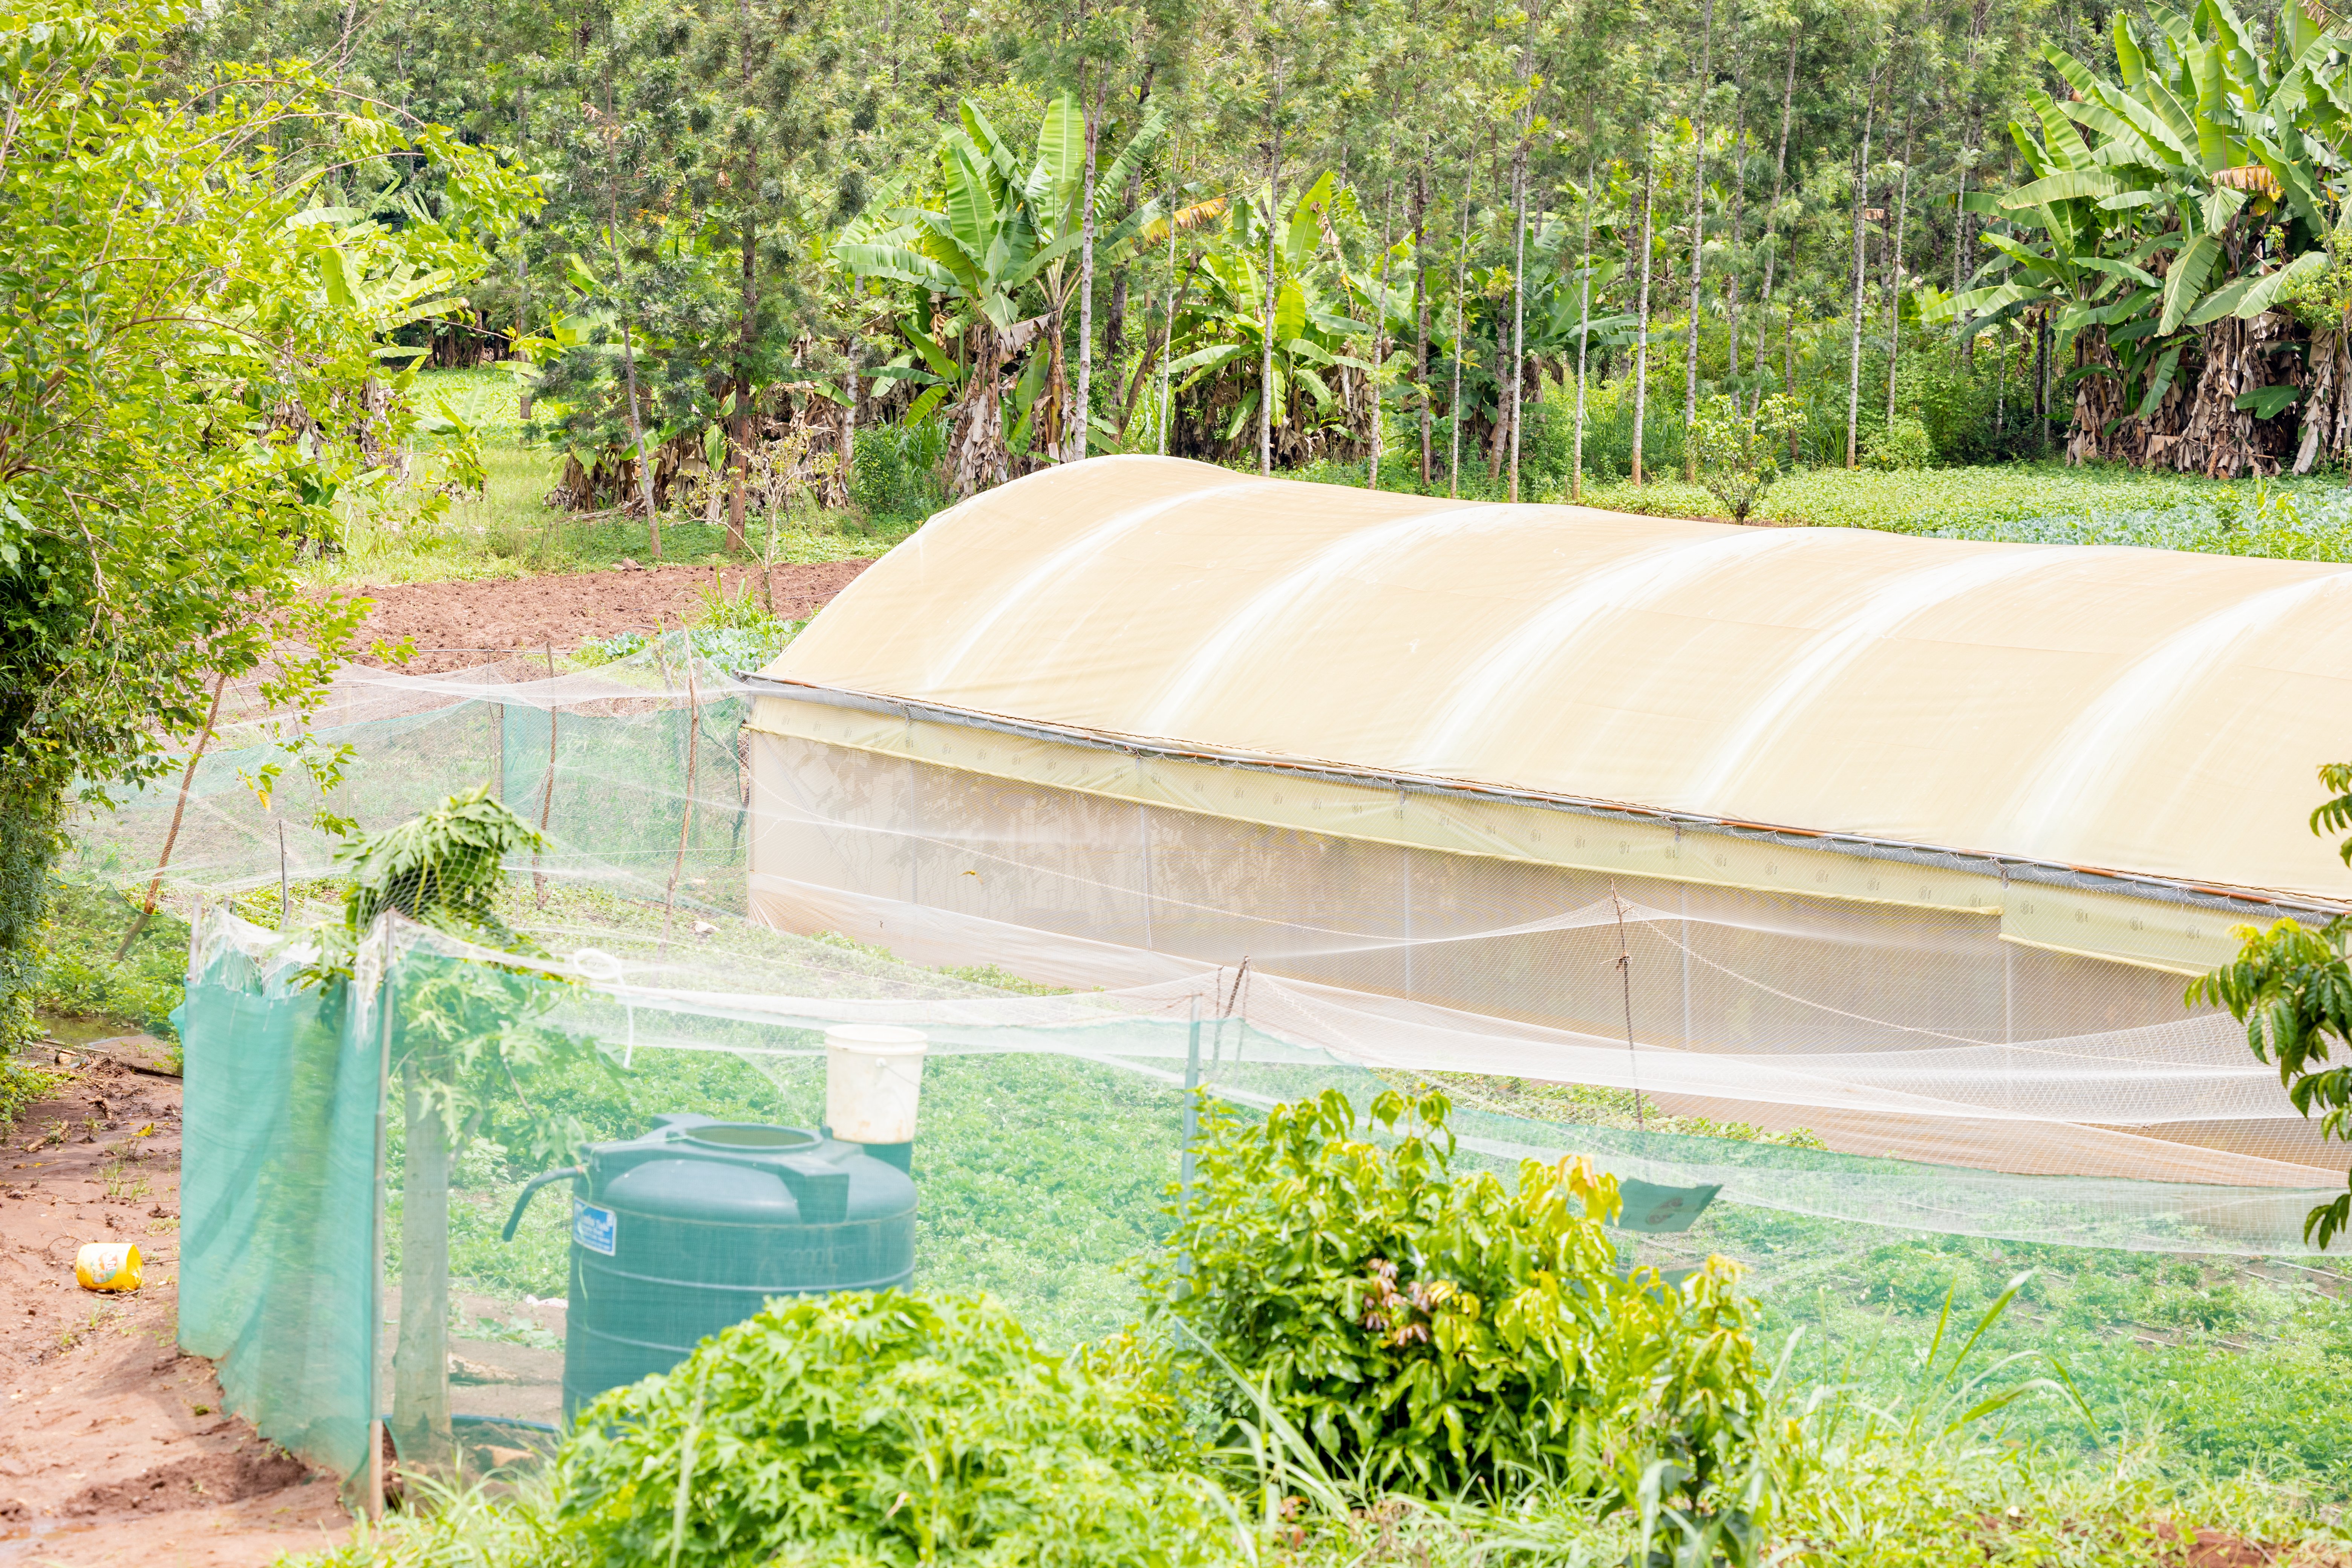 With greenhouses you can reduce the amount pests and rodents